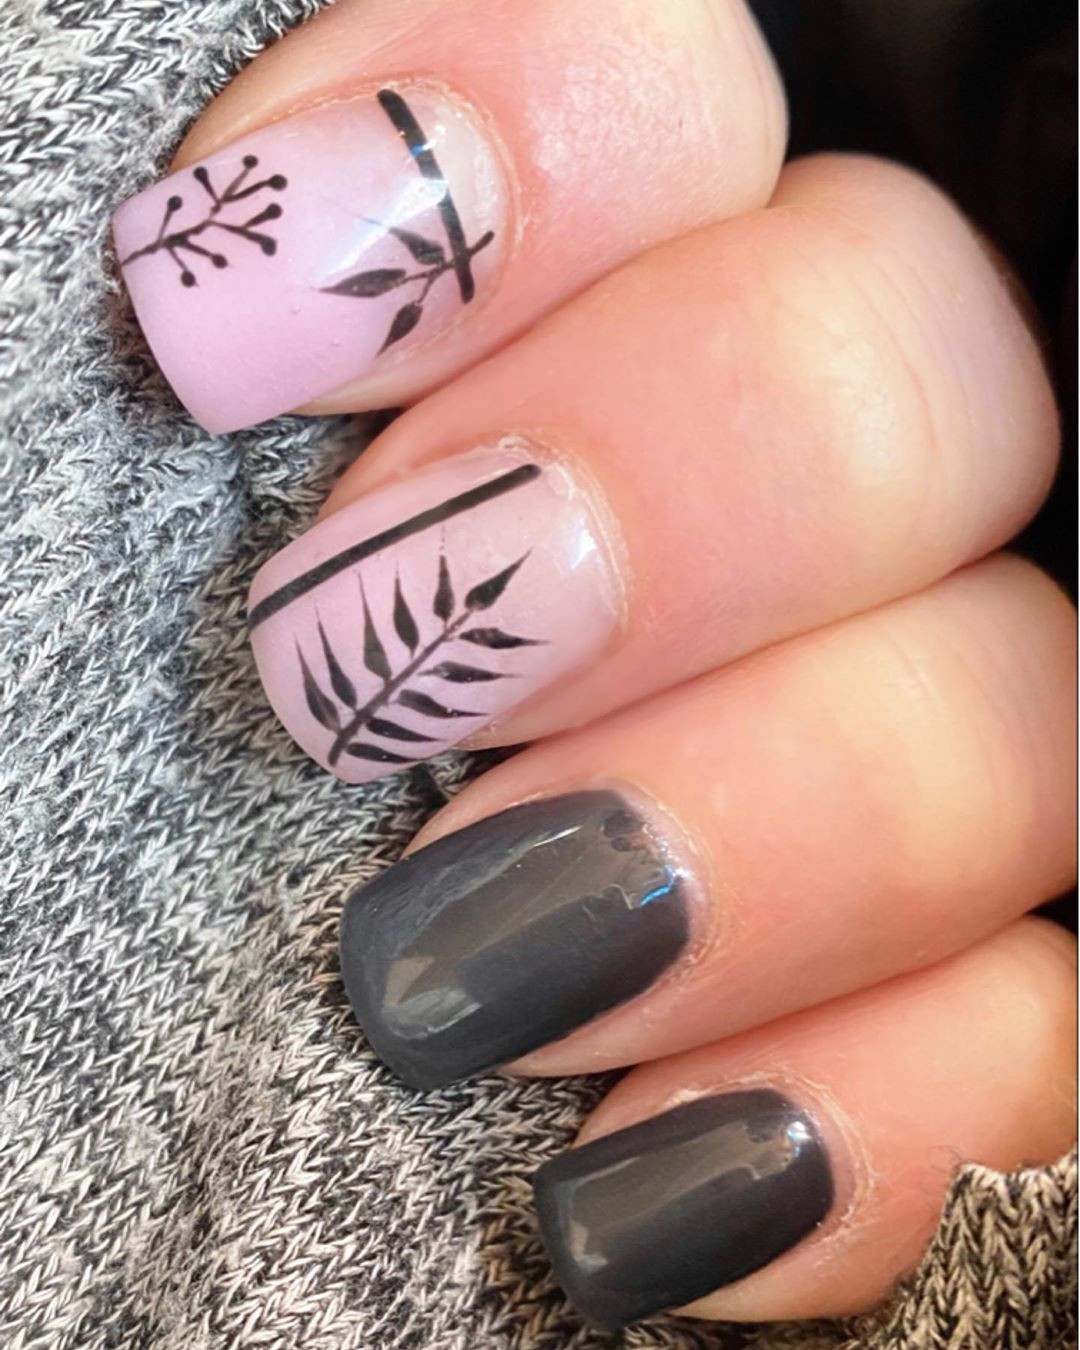 50 Spring Nails Trends That Are in for 2020,spring nails 2020,spring nailsacrylic,spring nails colors,spring nails coffin